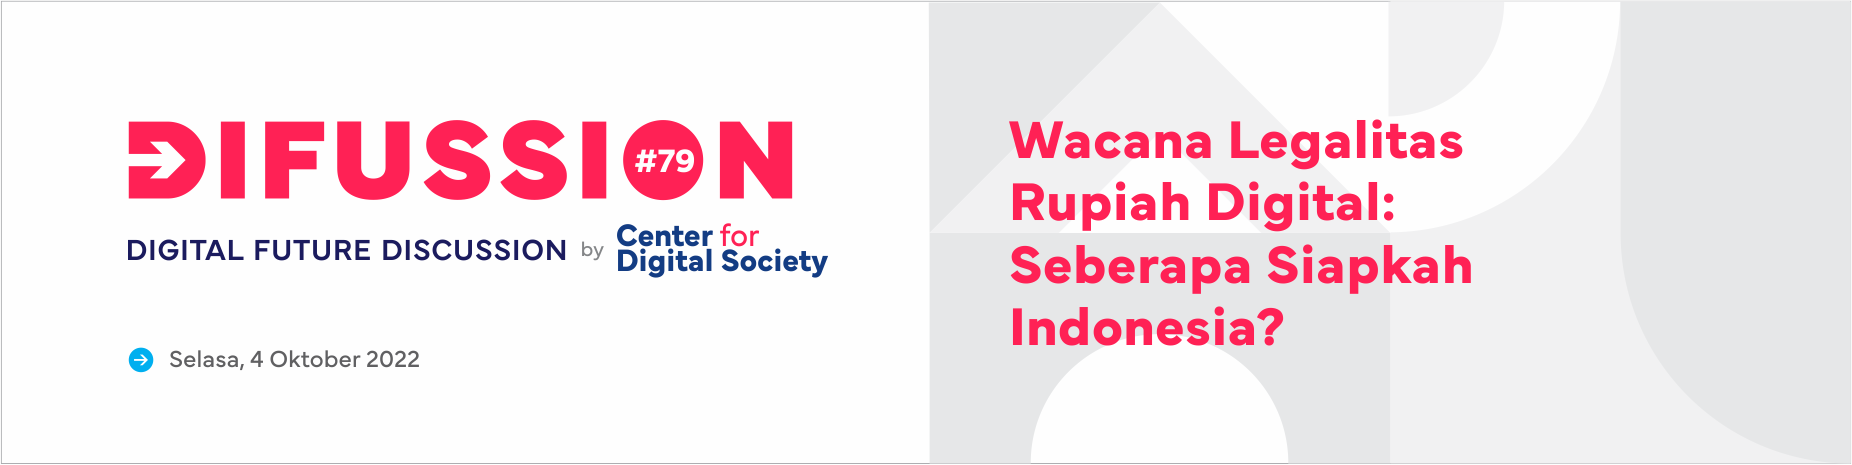 [PRESS RELEASE] Indonesia and Rupiah: Boosting Indonesia’s Economic Landscape with Digital Currency | Difussion #79